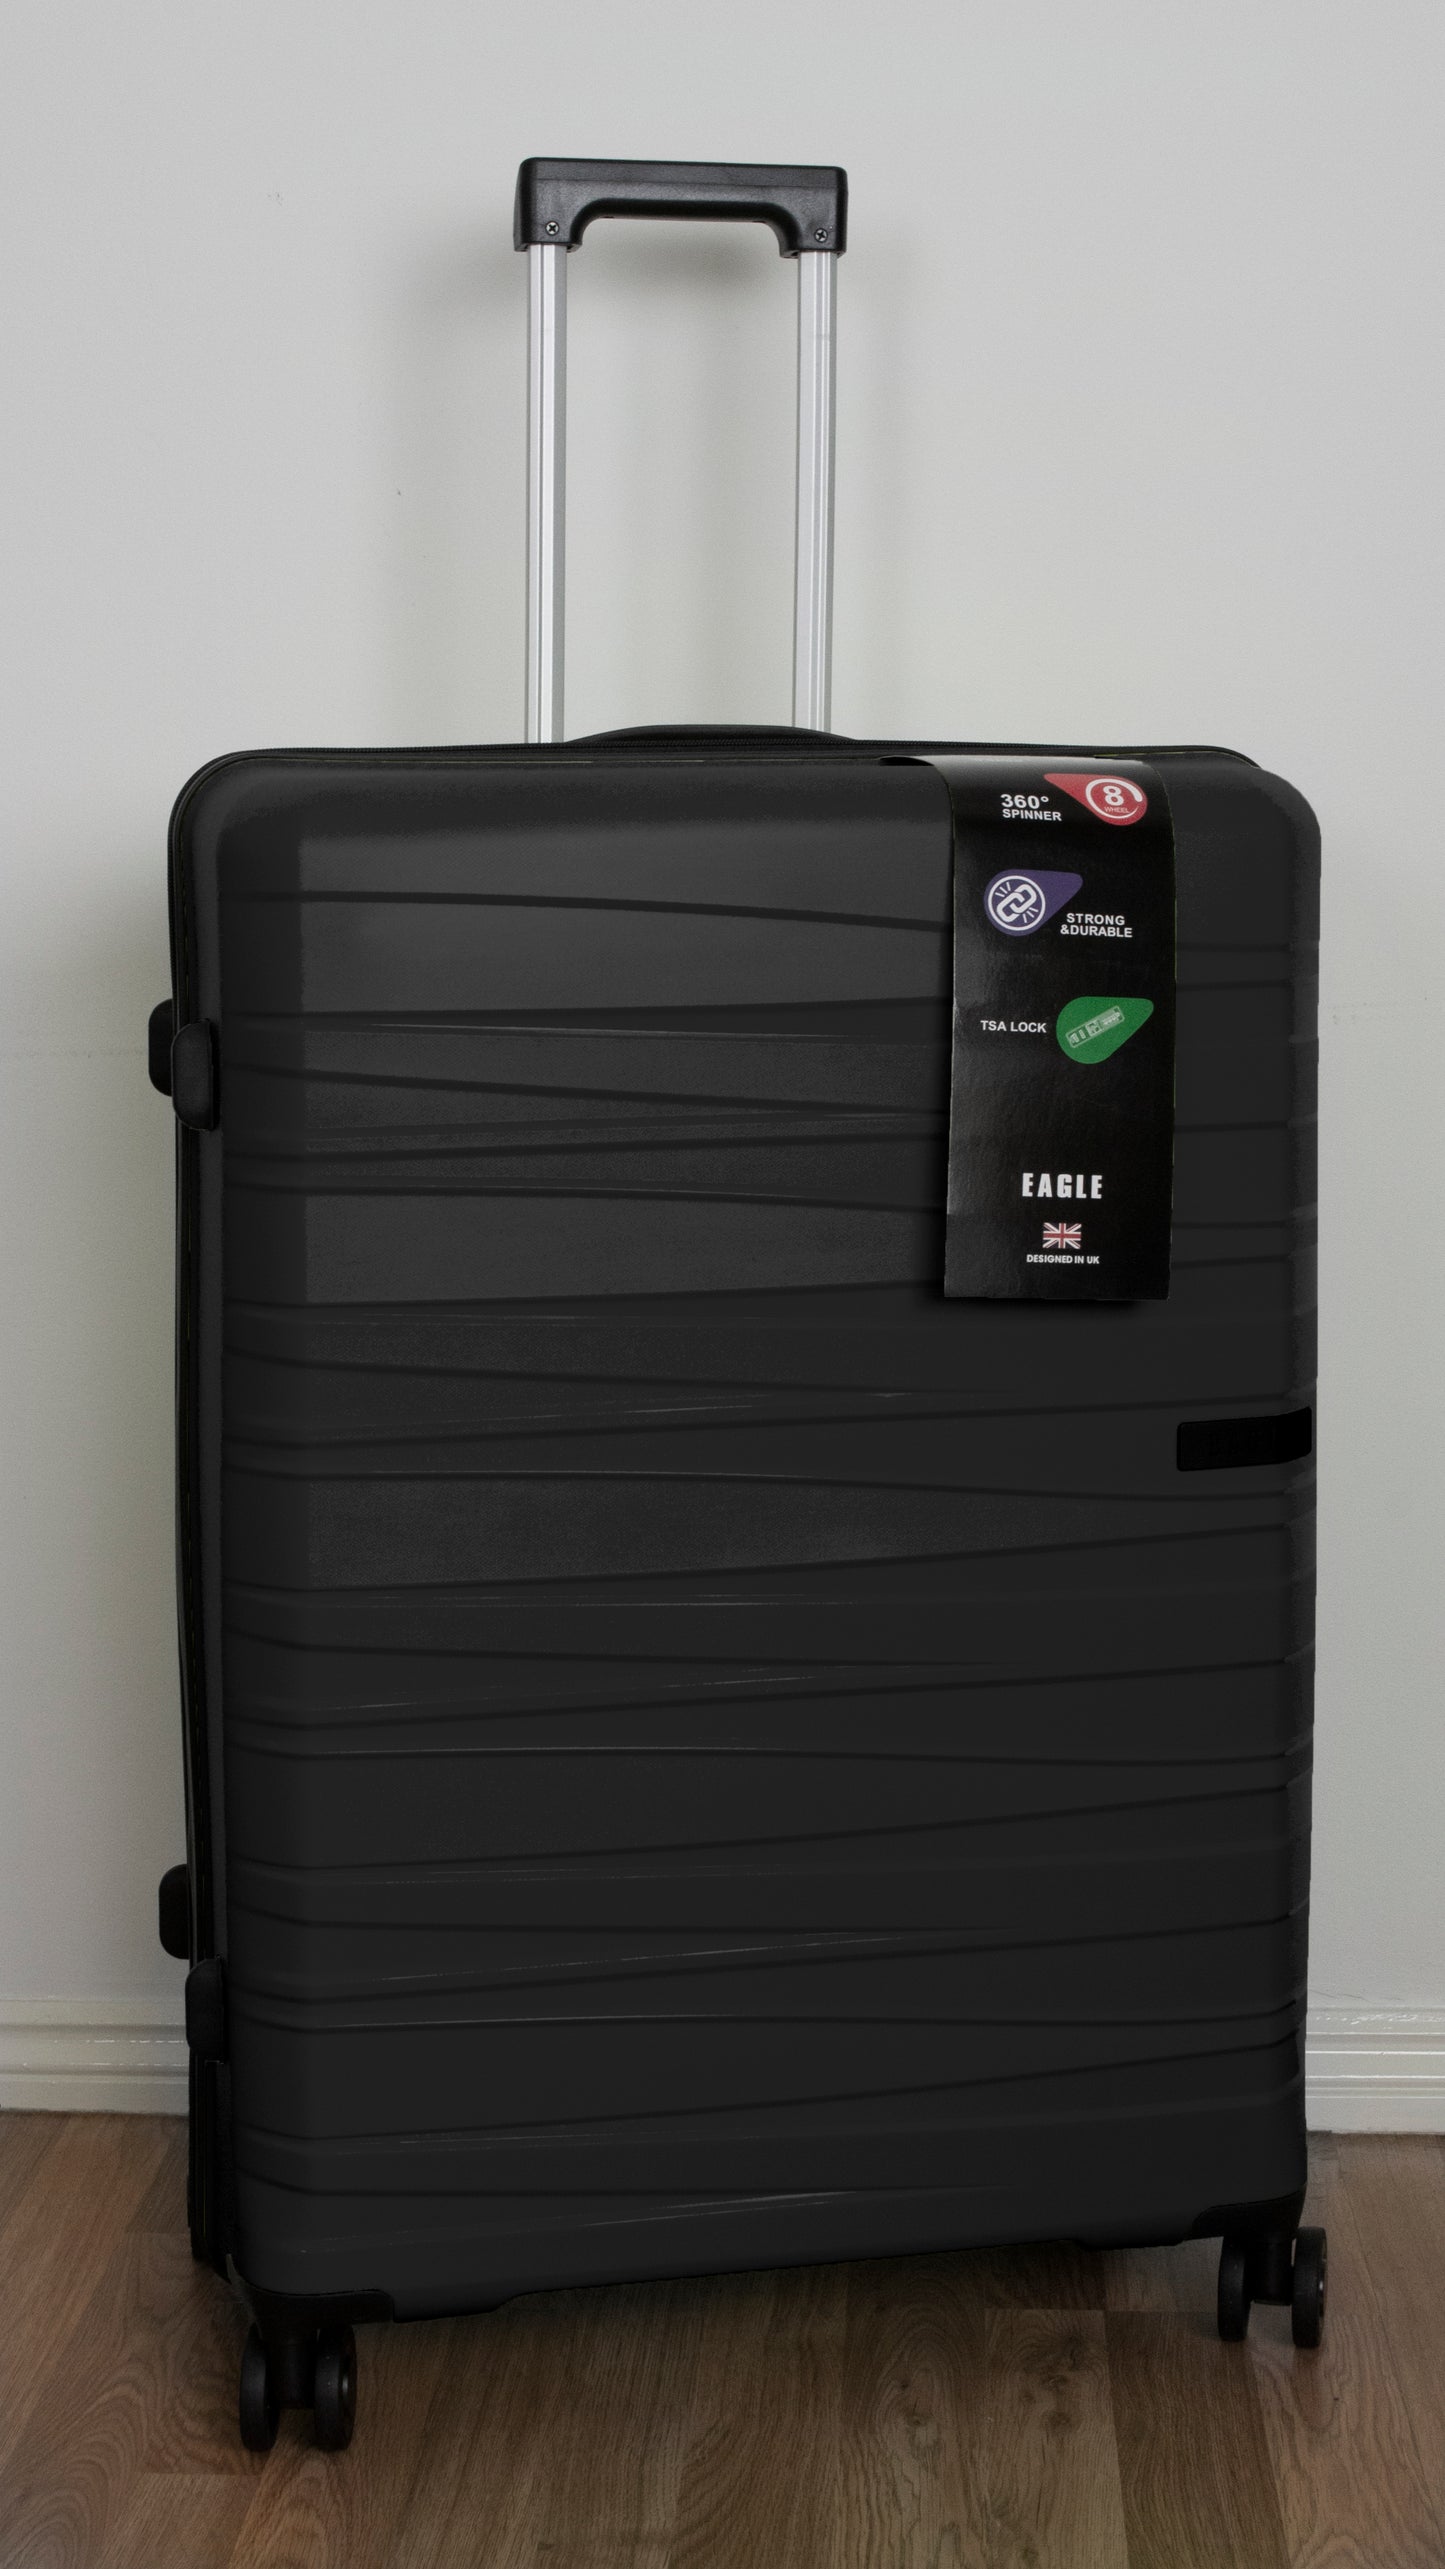 Waves ABS Hard Shell Cabin Suitcase Black